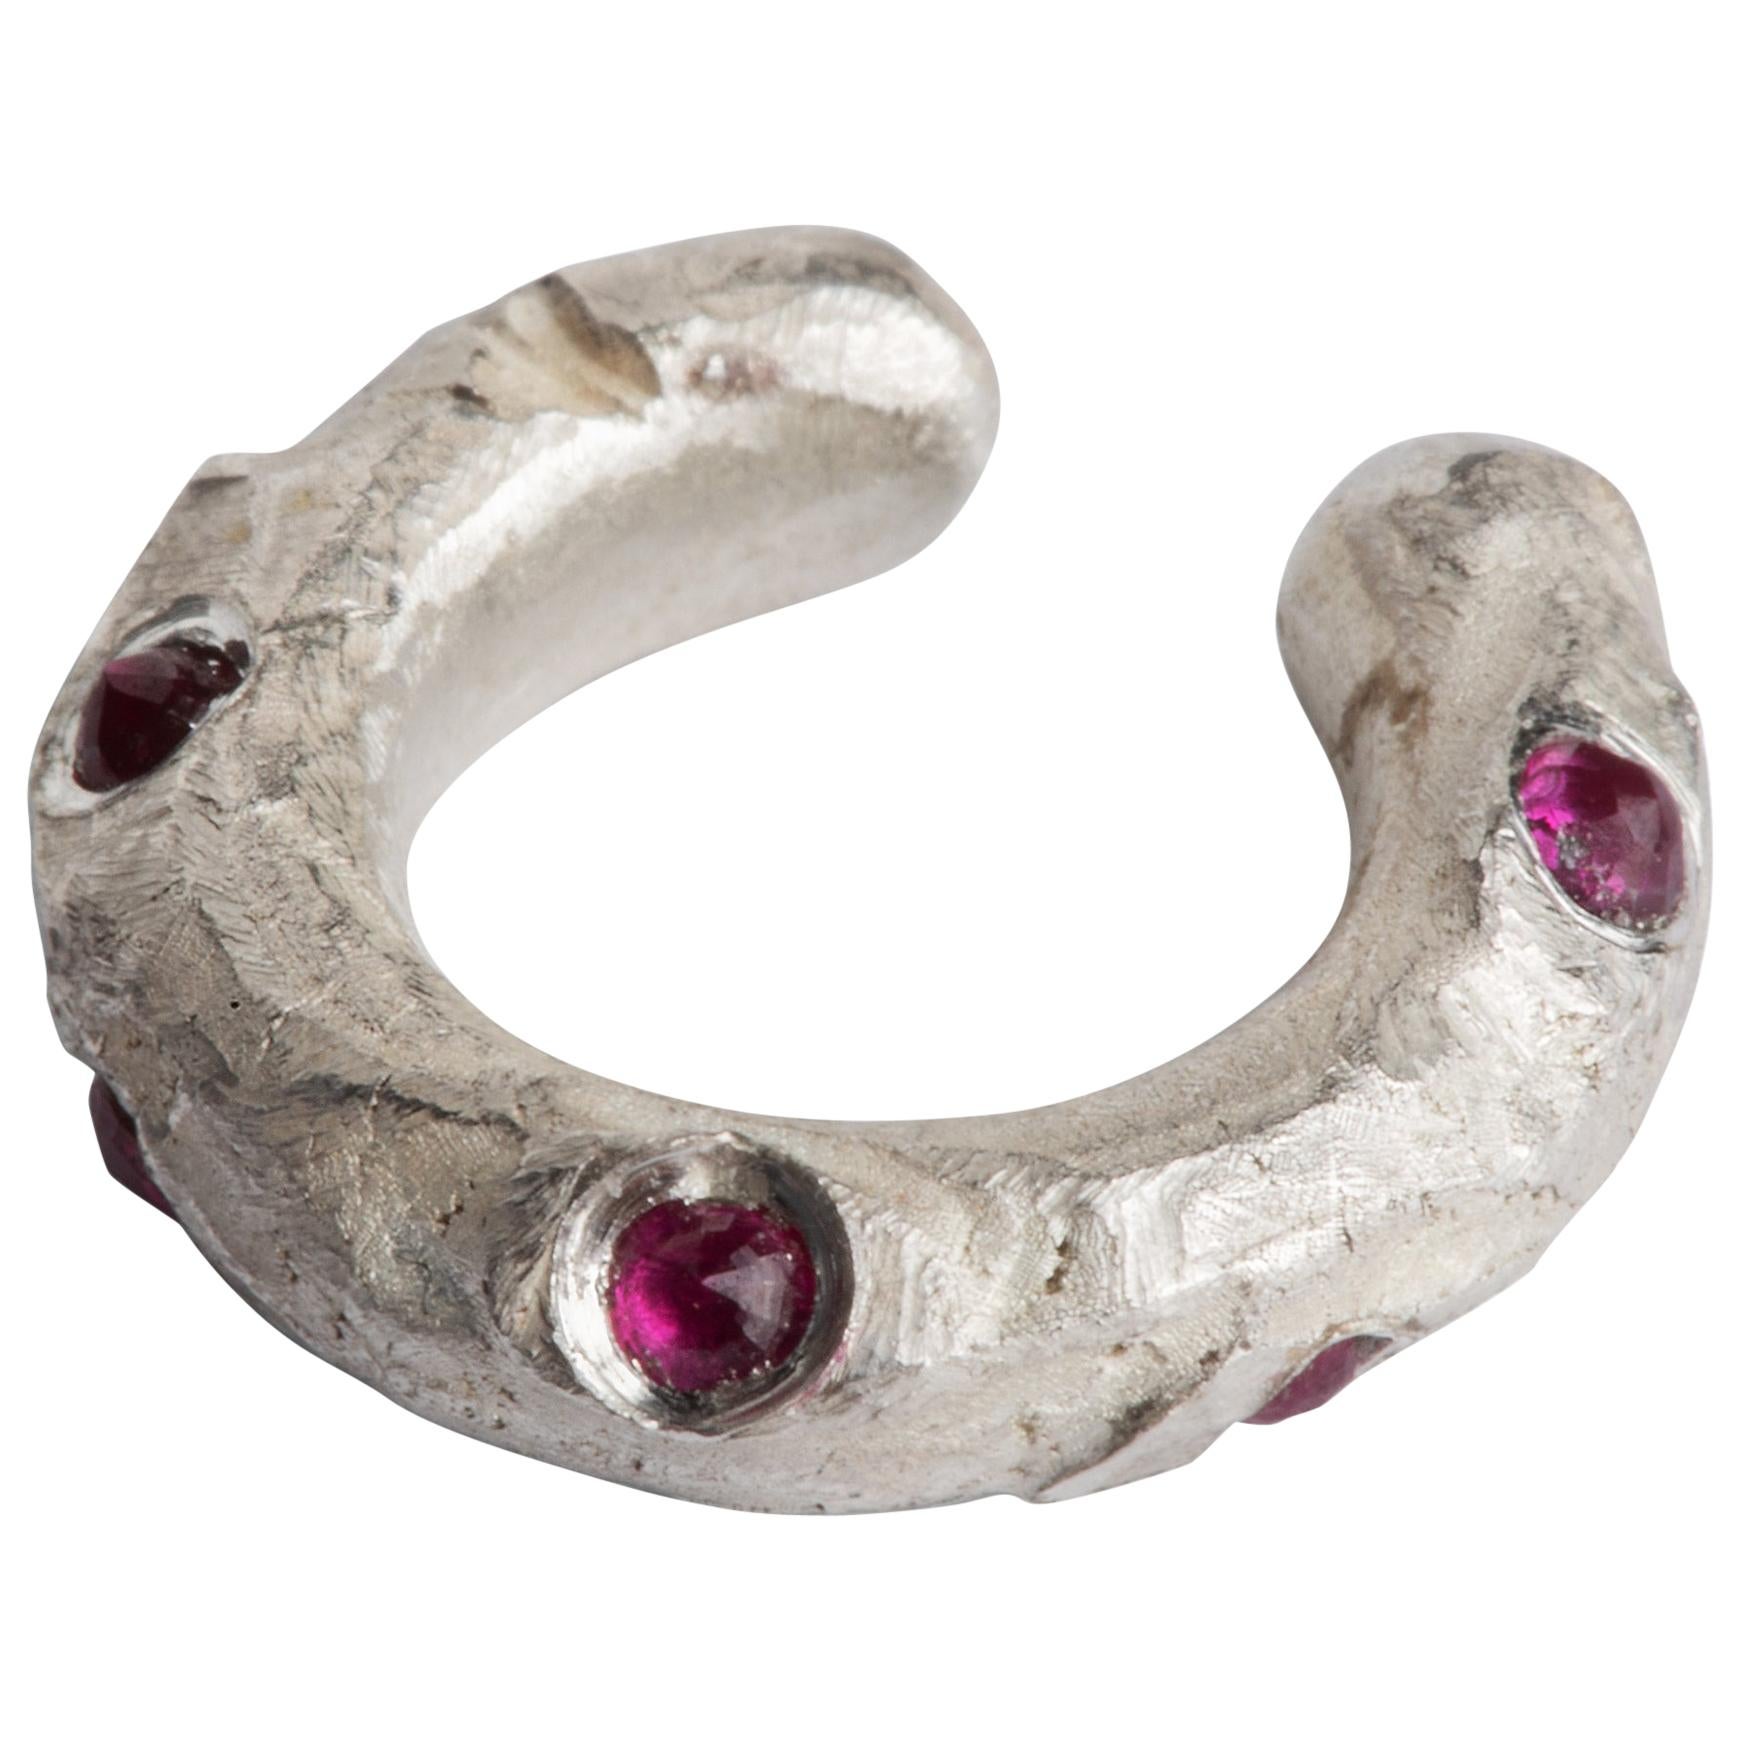 Embirikos Demeter's Cuff in Sterling Silver and Set with Rubies For Sale